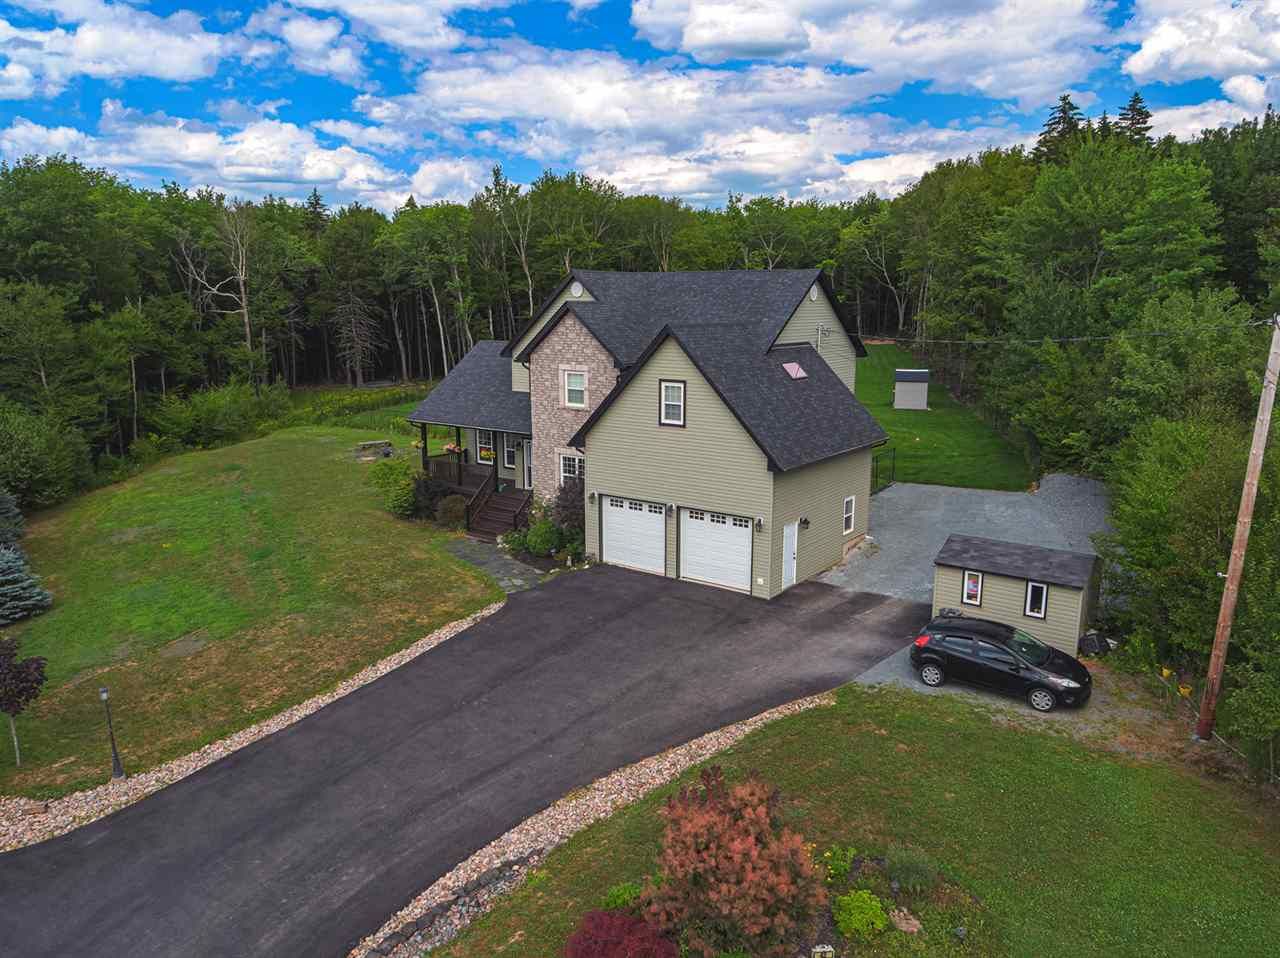 Main Photo: 42 PETER THOMAS Drive in Windsor Junction: 30-Waverley, Fall River, Oakfield Residential for sale (Halifax-Dartmouth)  : MLS®# 201920586